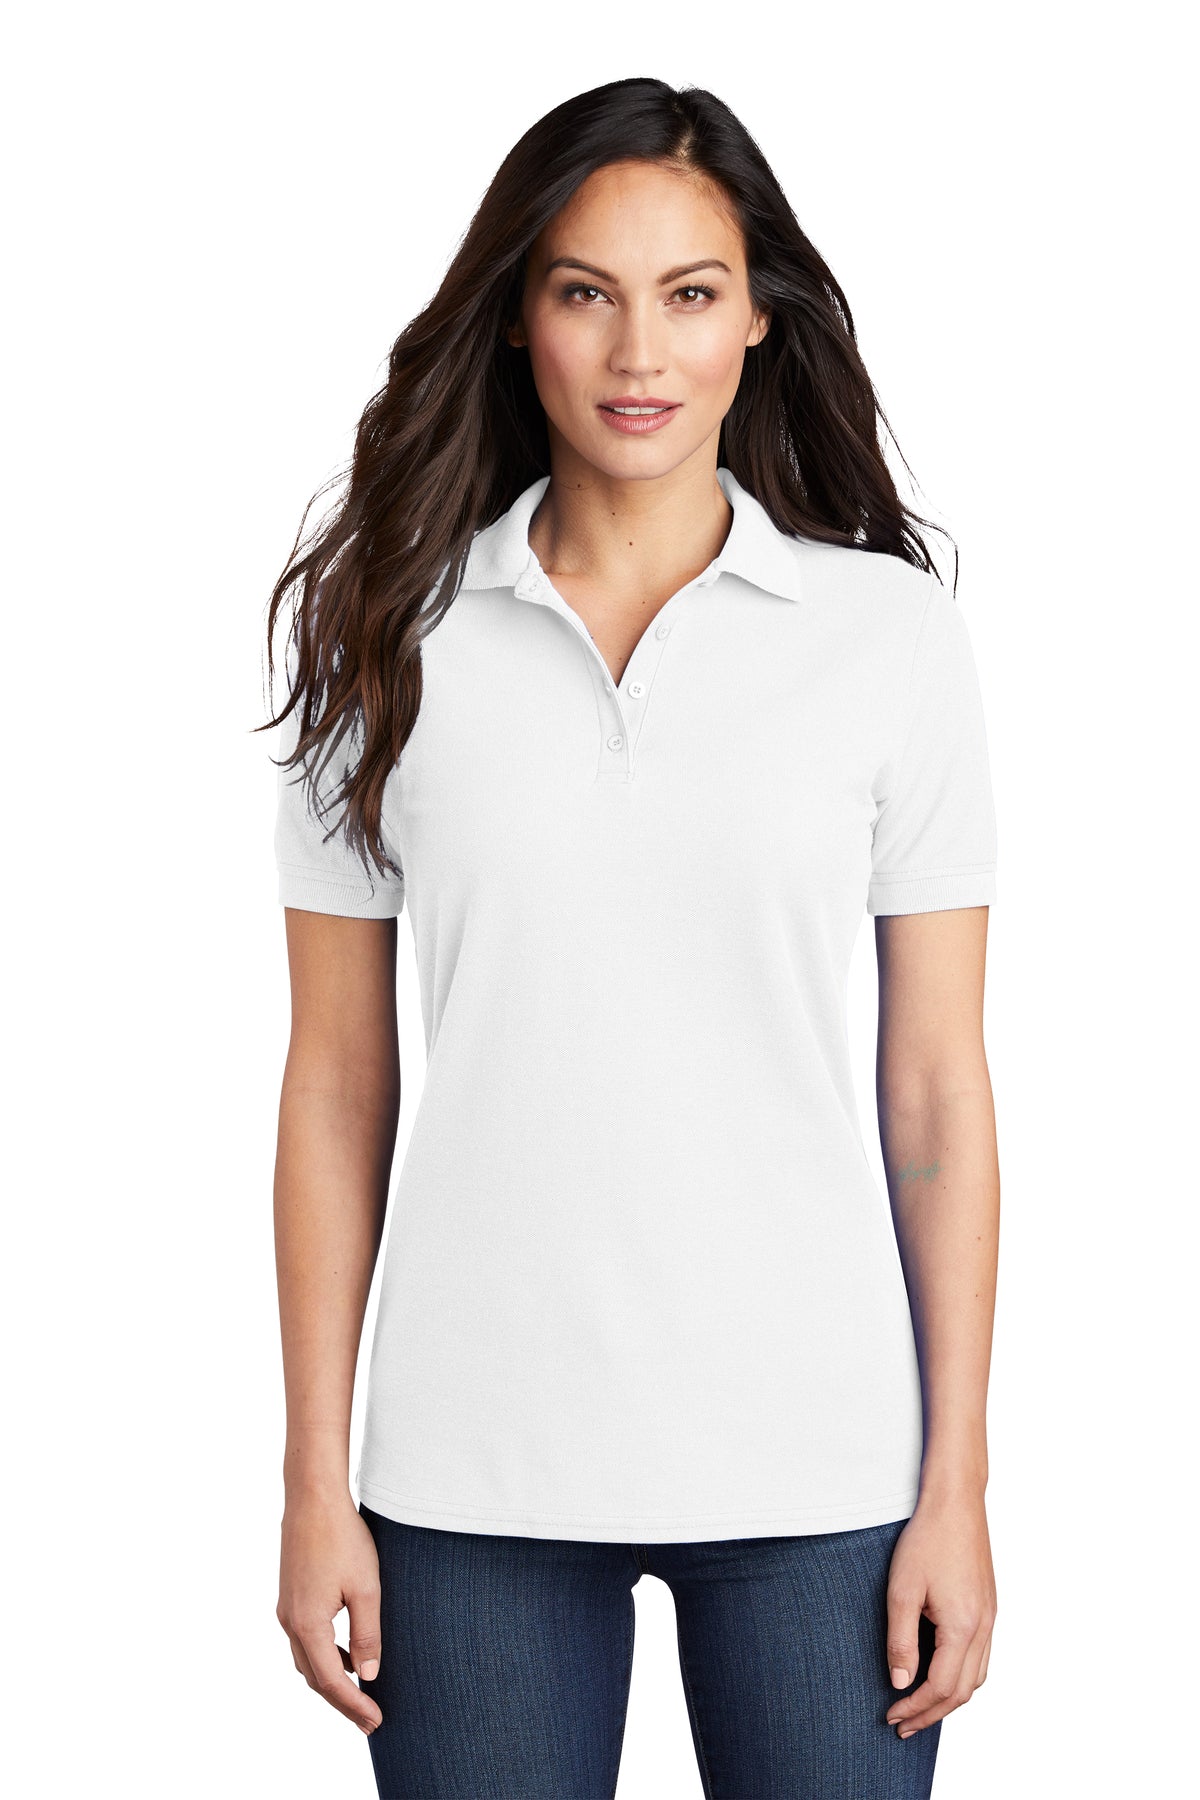 WINDSOR- Ladies Polo - White (LKP155) - Southern Grace Creations